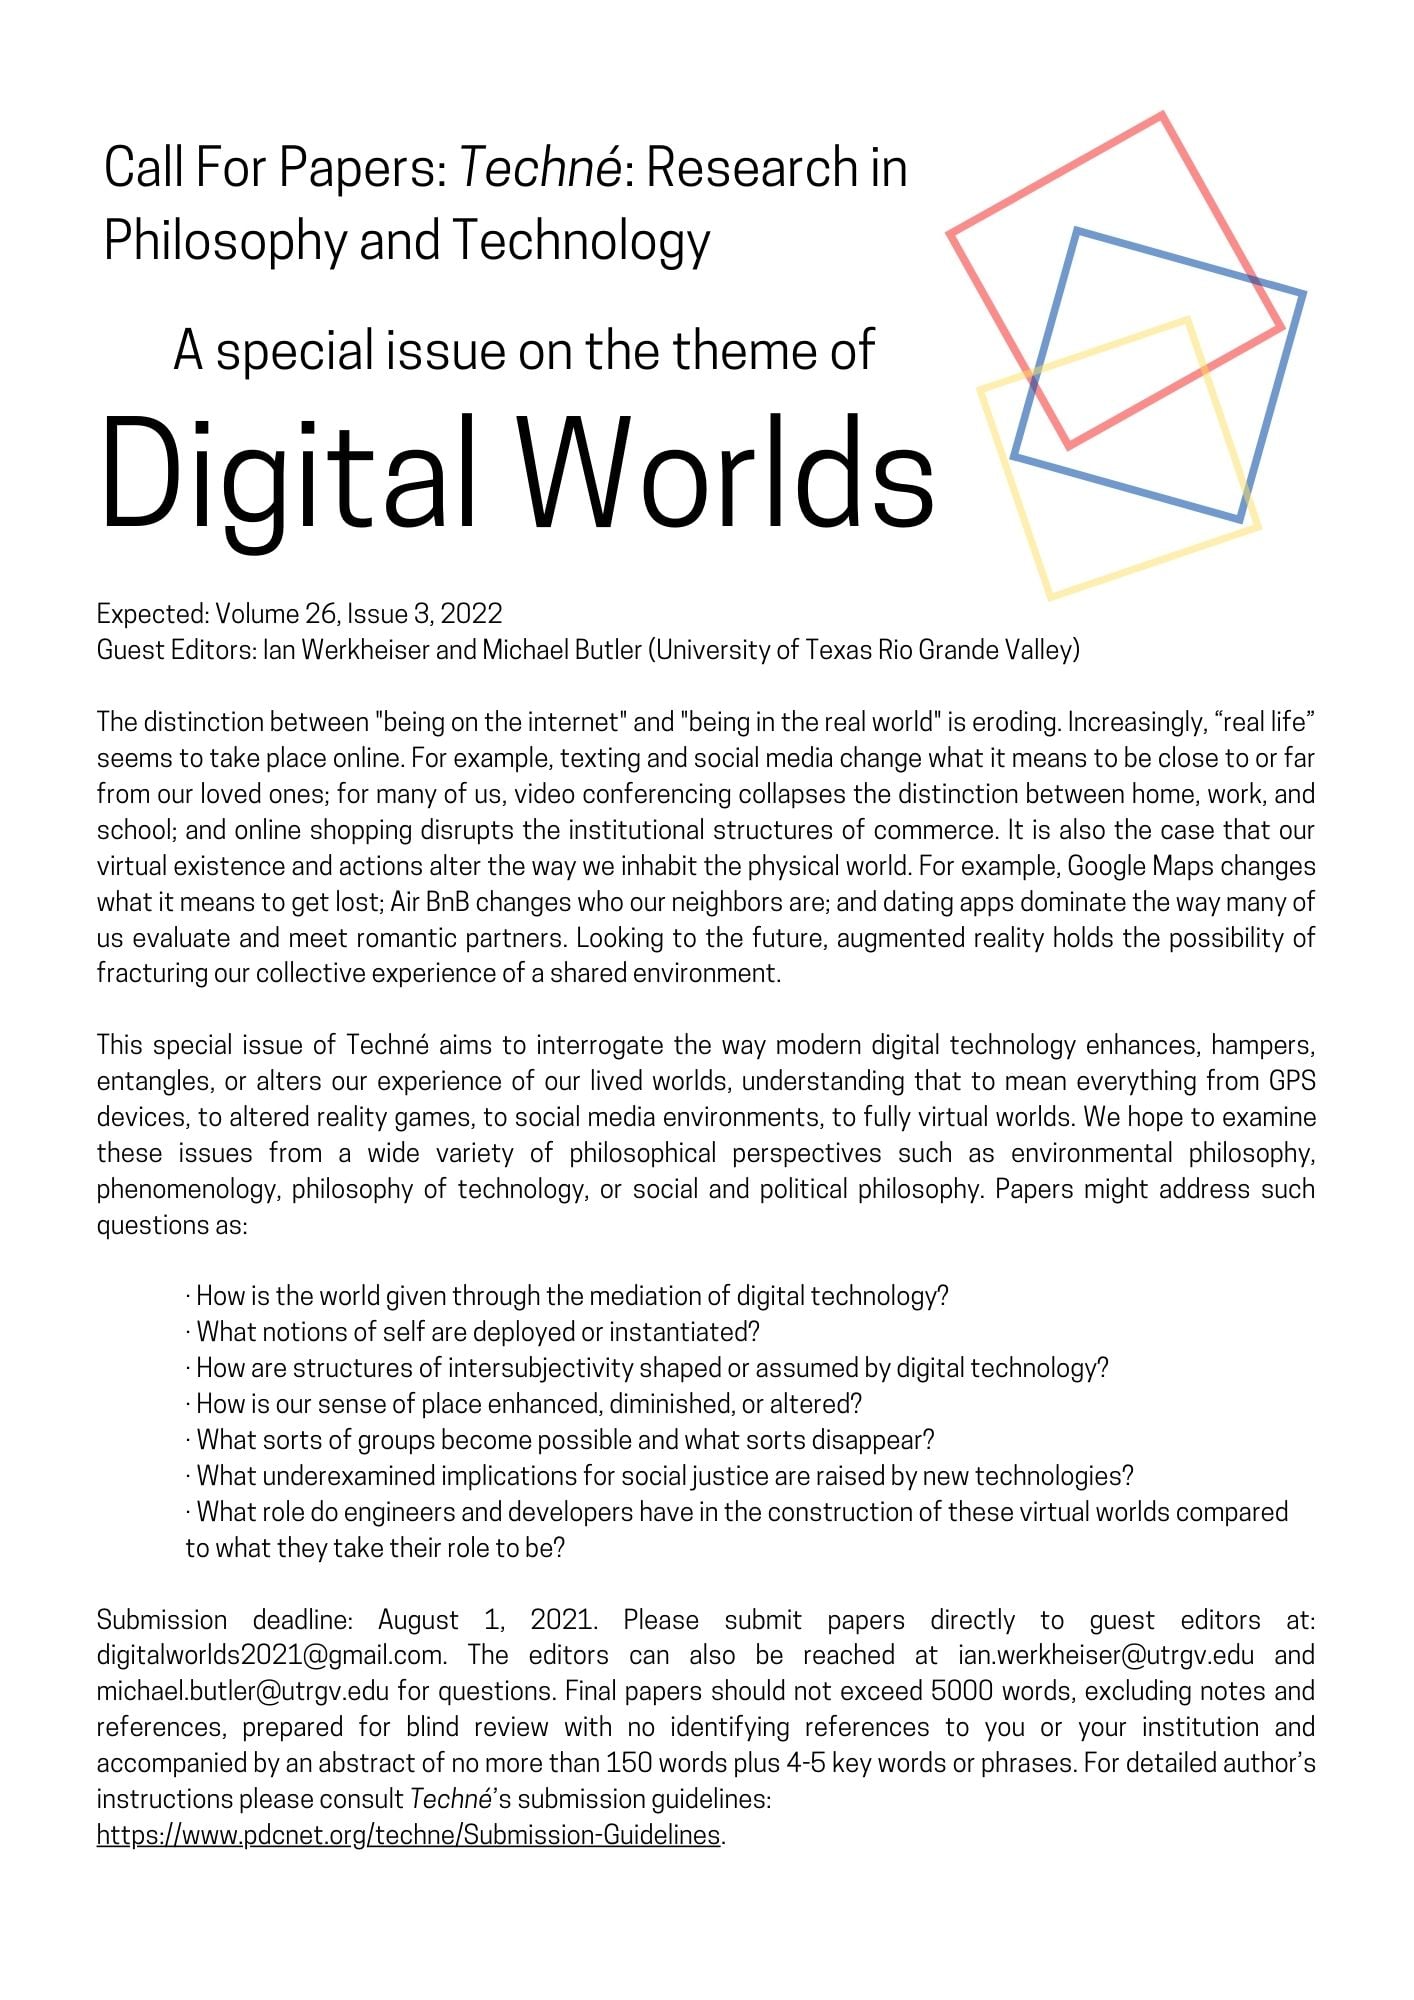 A special issue on the theme of Digital Worlds